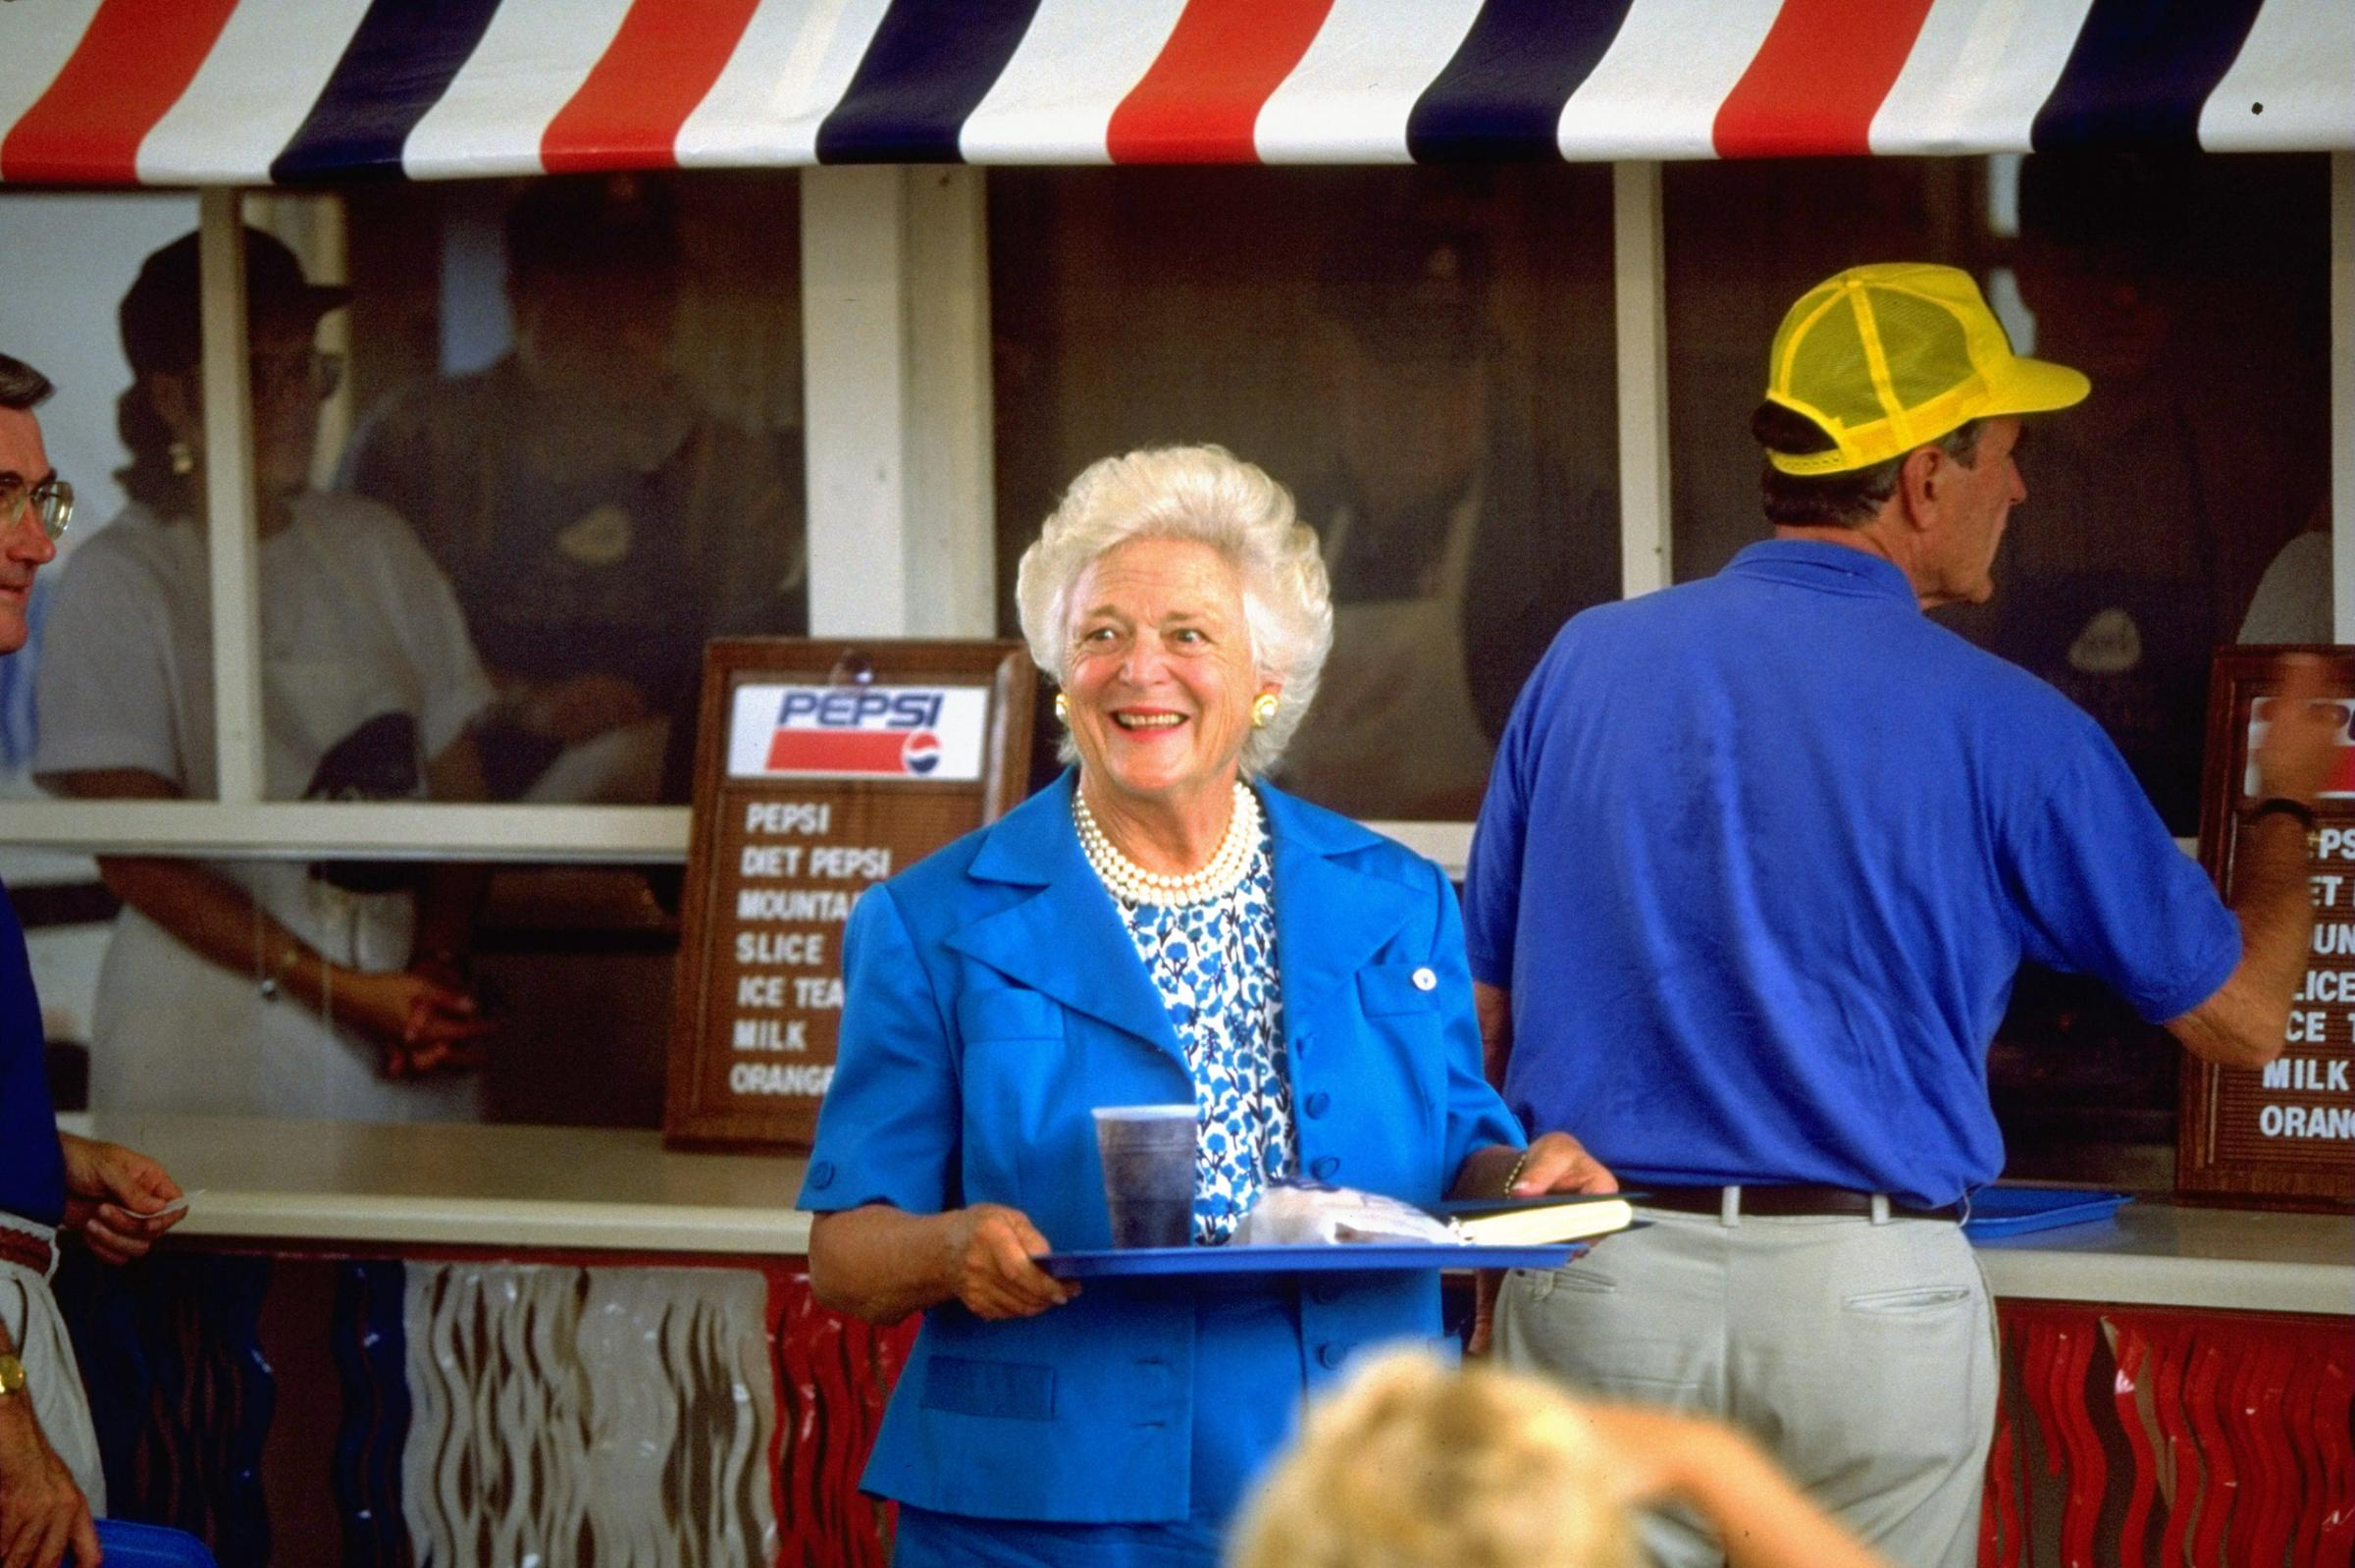 President George H.W. Bush and Barbara Bush patronizing food stand during campaign stop at state fair. August 23, 1992.